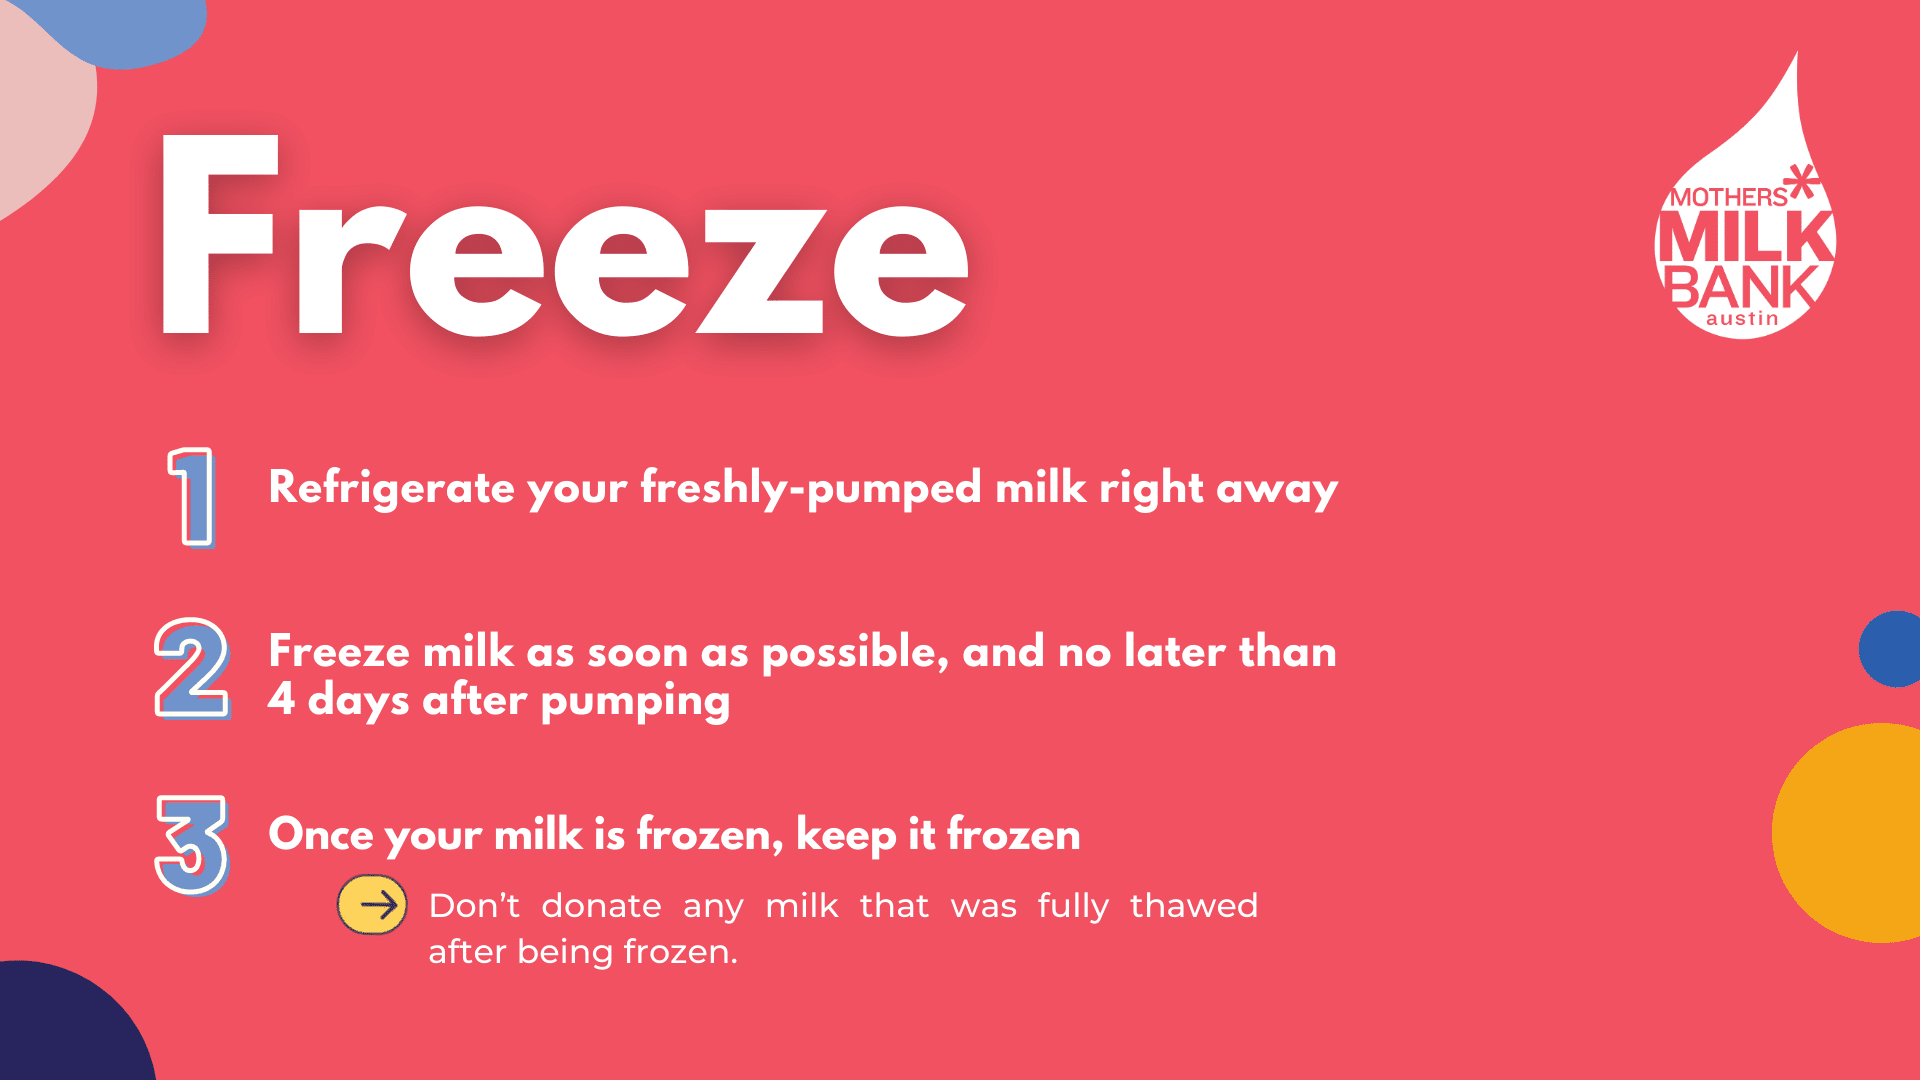 Steps to Freeze milk safely for Mothers Milk Bank